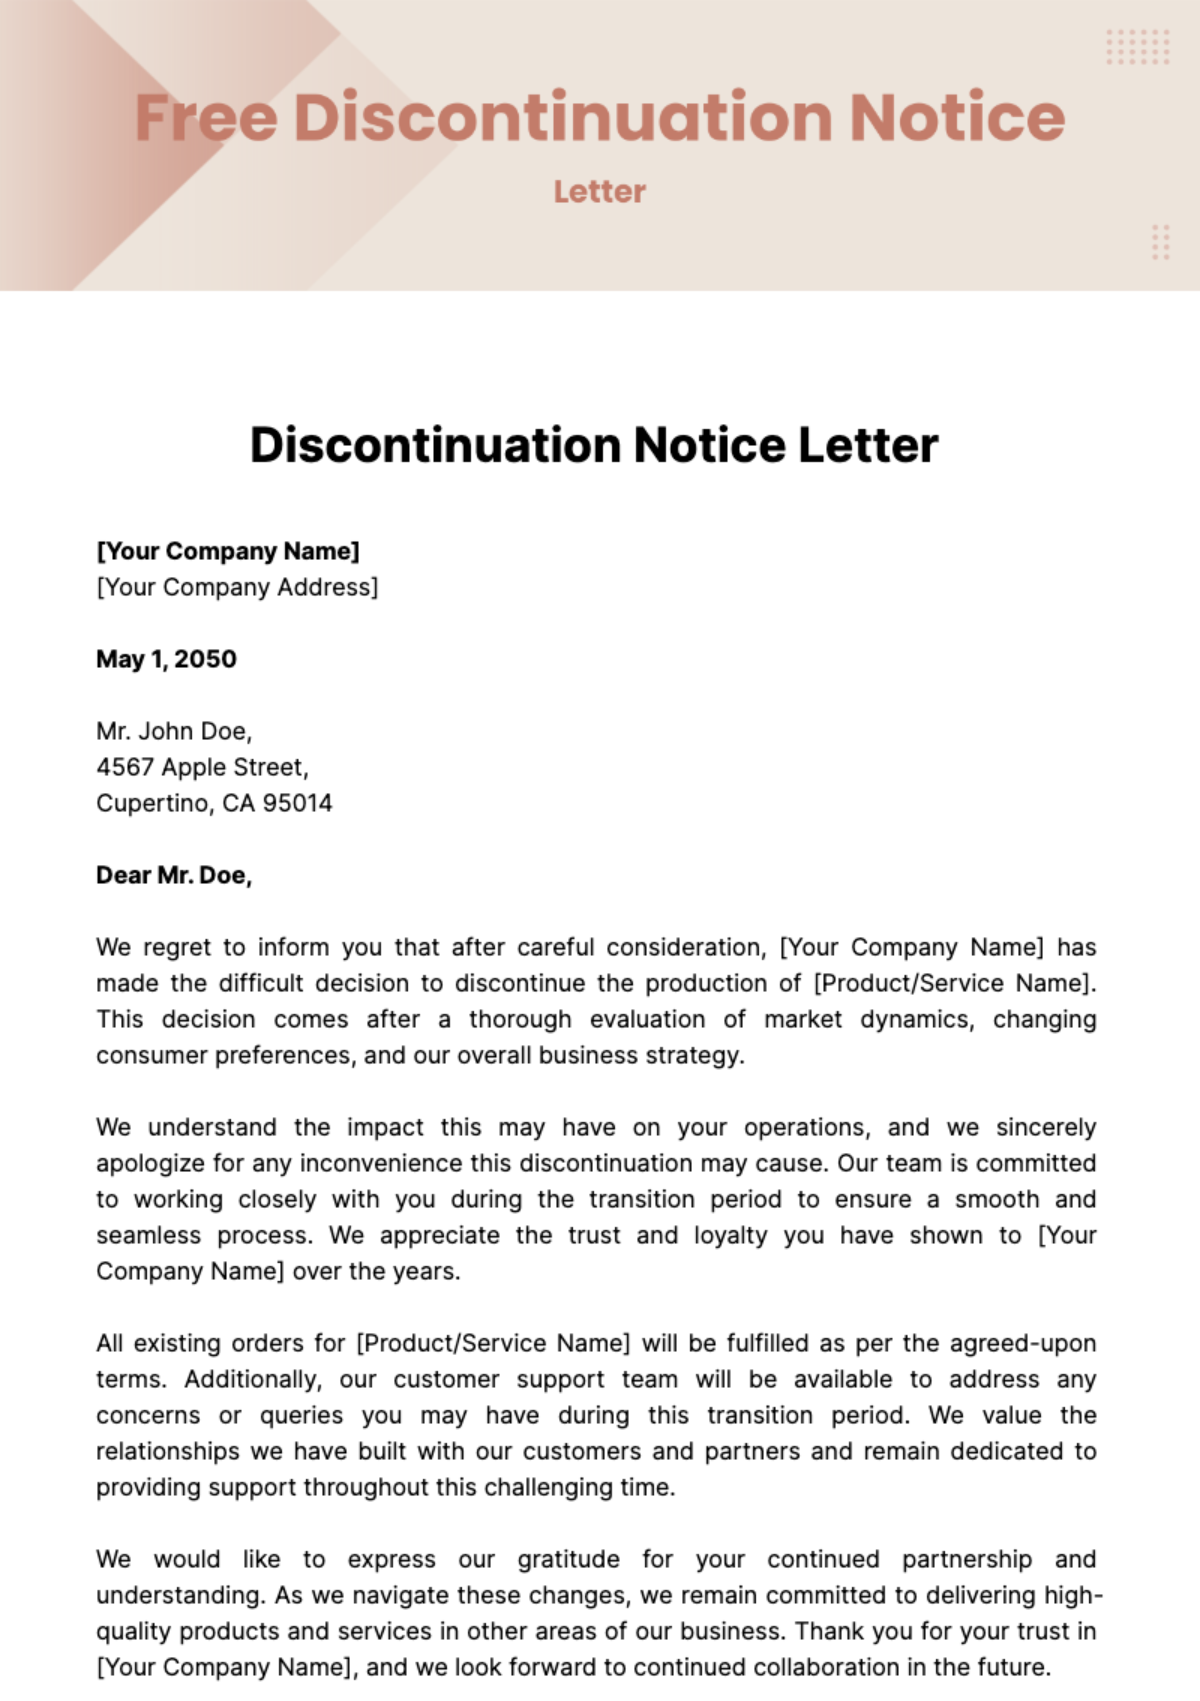 Free Discontinuation Notice Letter Template